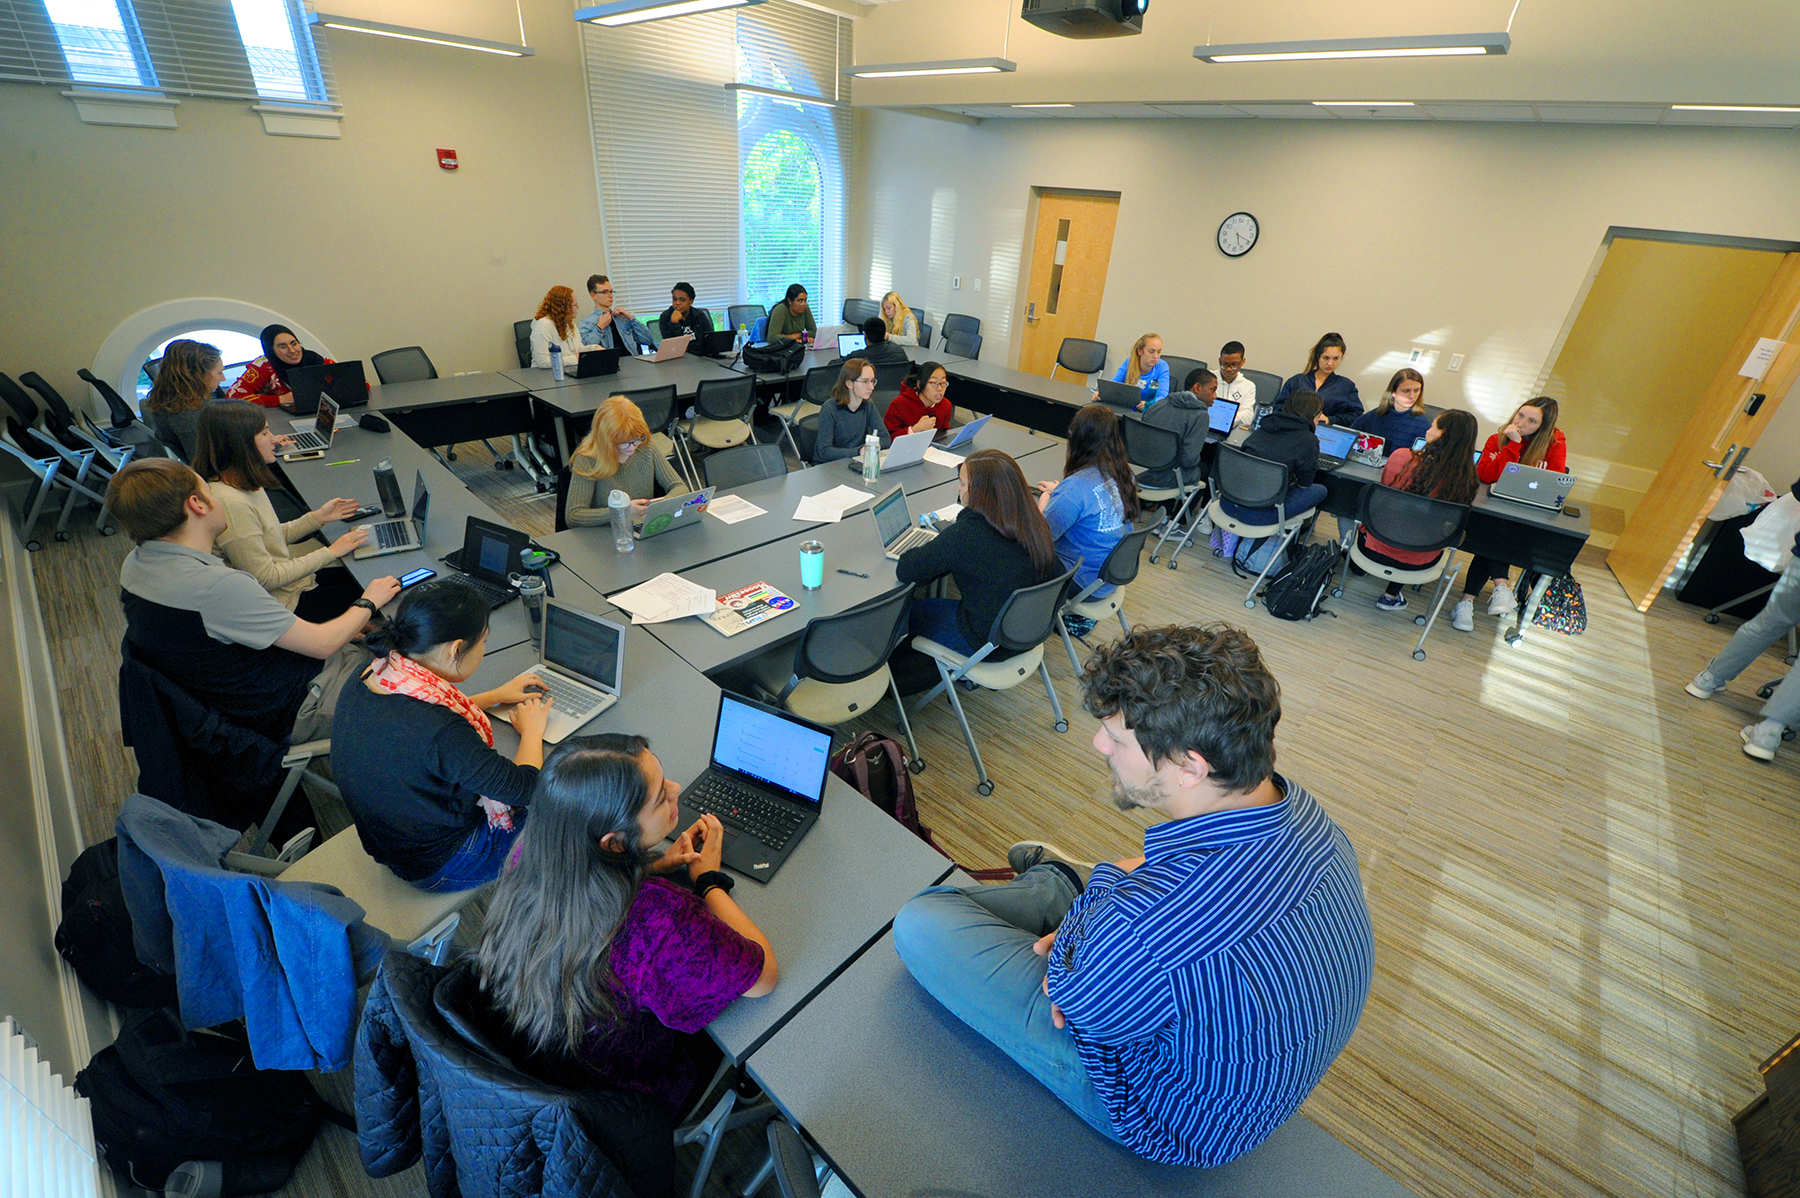 HGAPS members meet weekly over pizza in Howell Hall to brainstorm ideas and work on projects. (photo by Donn Young)